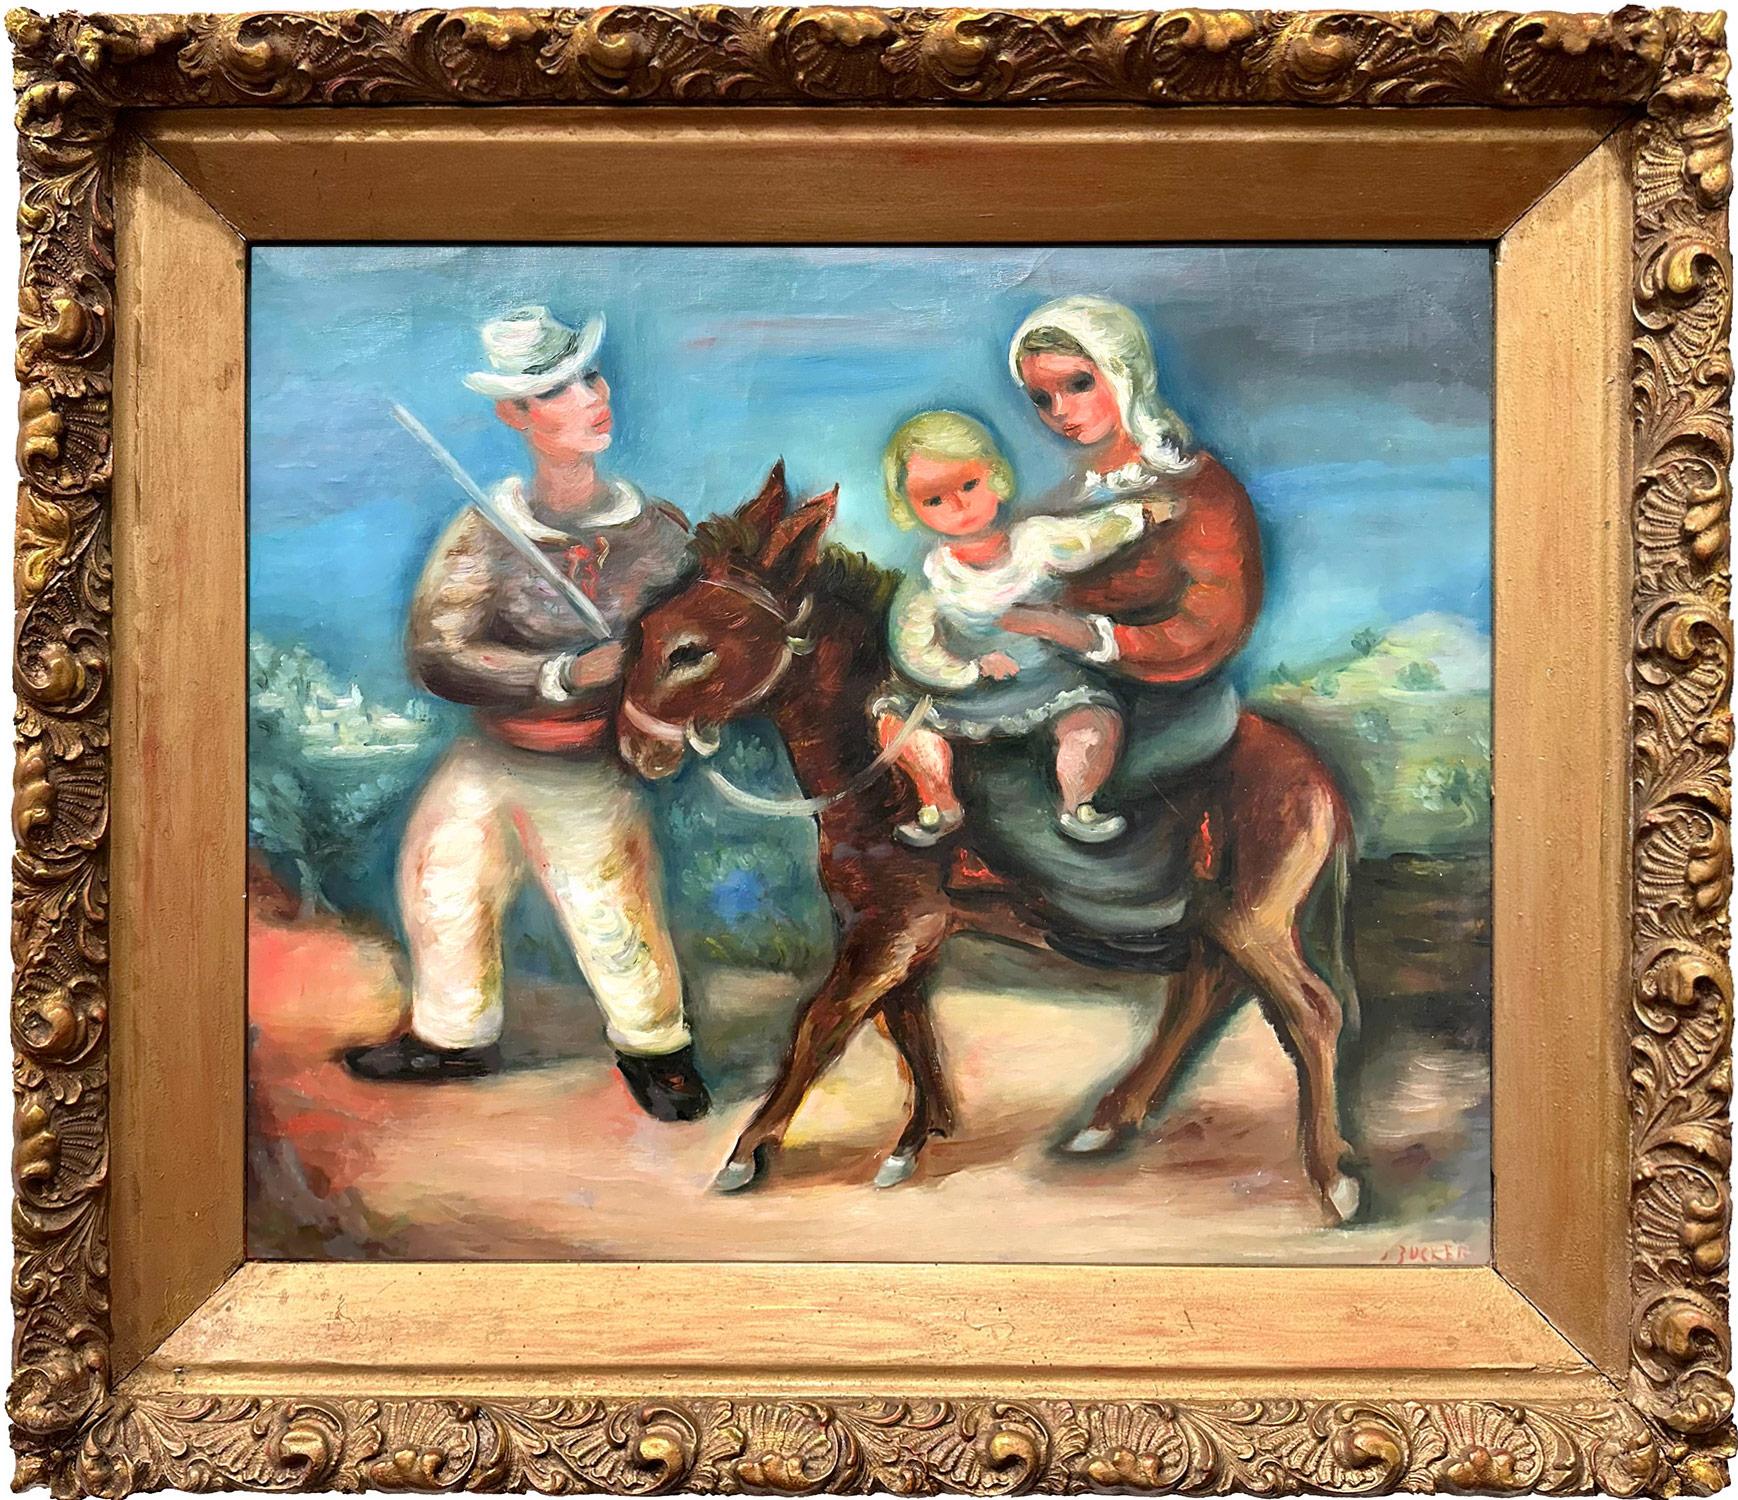 Jacques Zucker Figurative Painting - "The Holy Family" Post-Impressionist Pastoral & Figures Oil Painting on Canvas